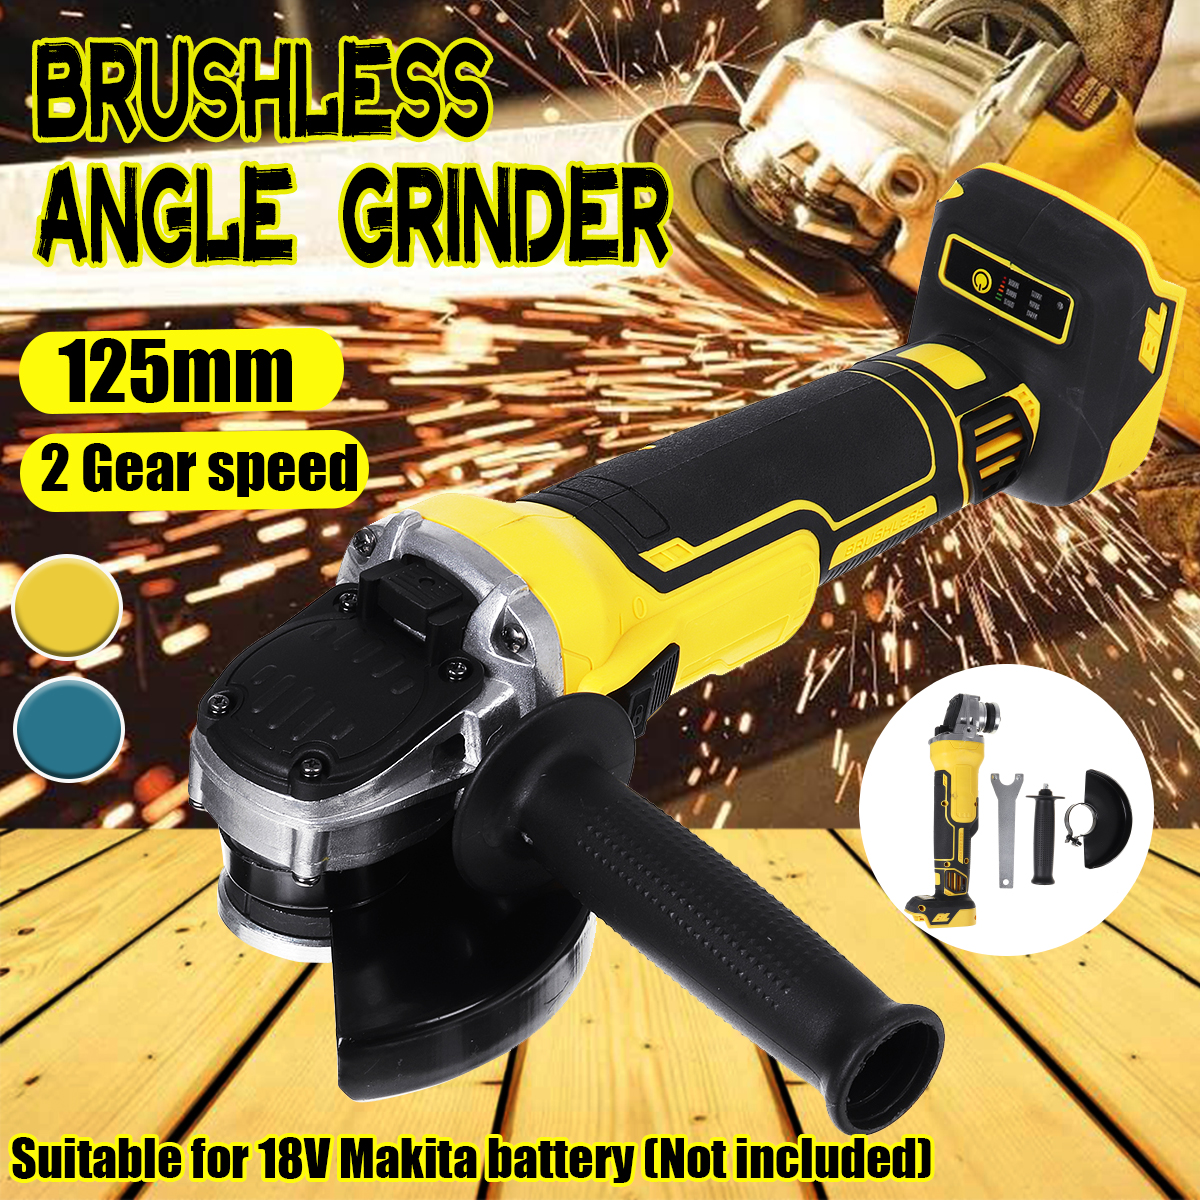 Electric-Brushless-Cordless-Angle-Grinder-M10-125mm-Cut-for-Makita-18V-Battery-1791879-2